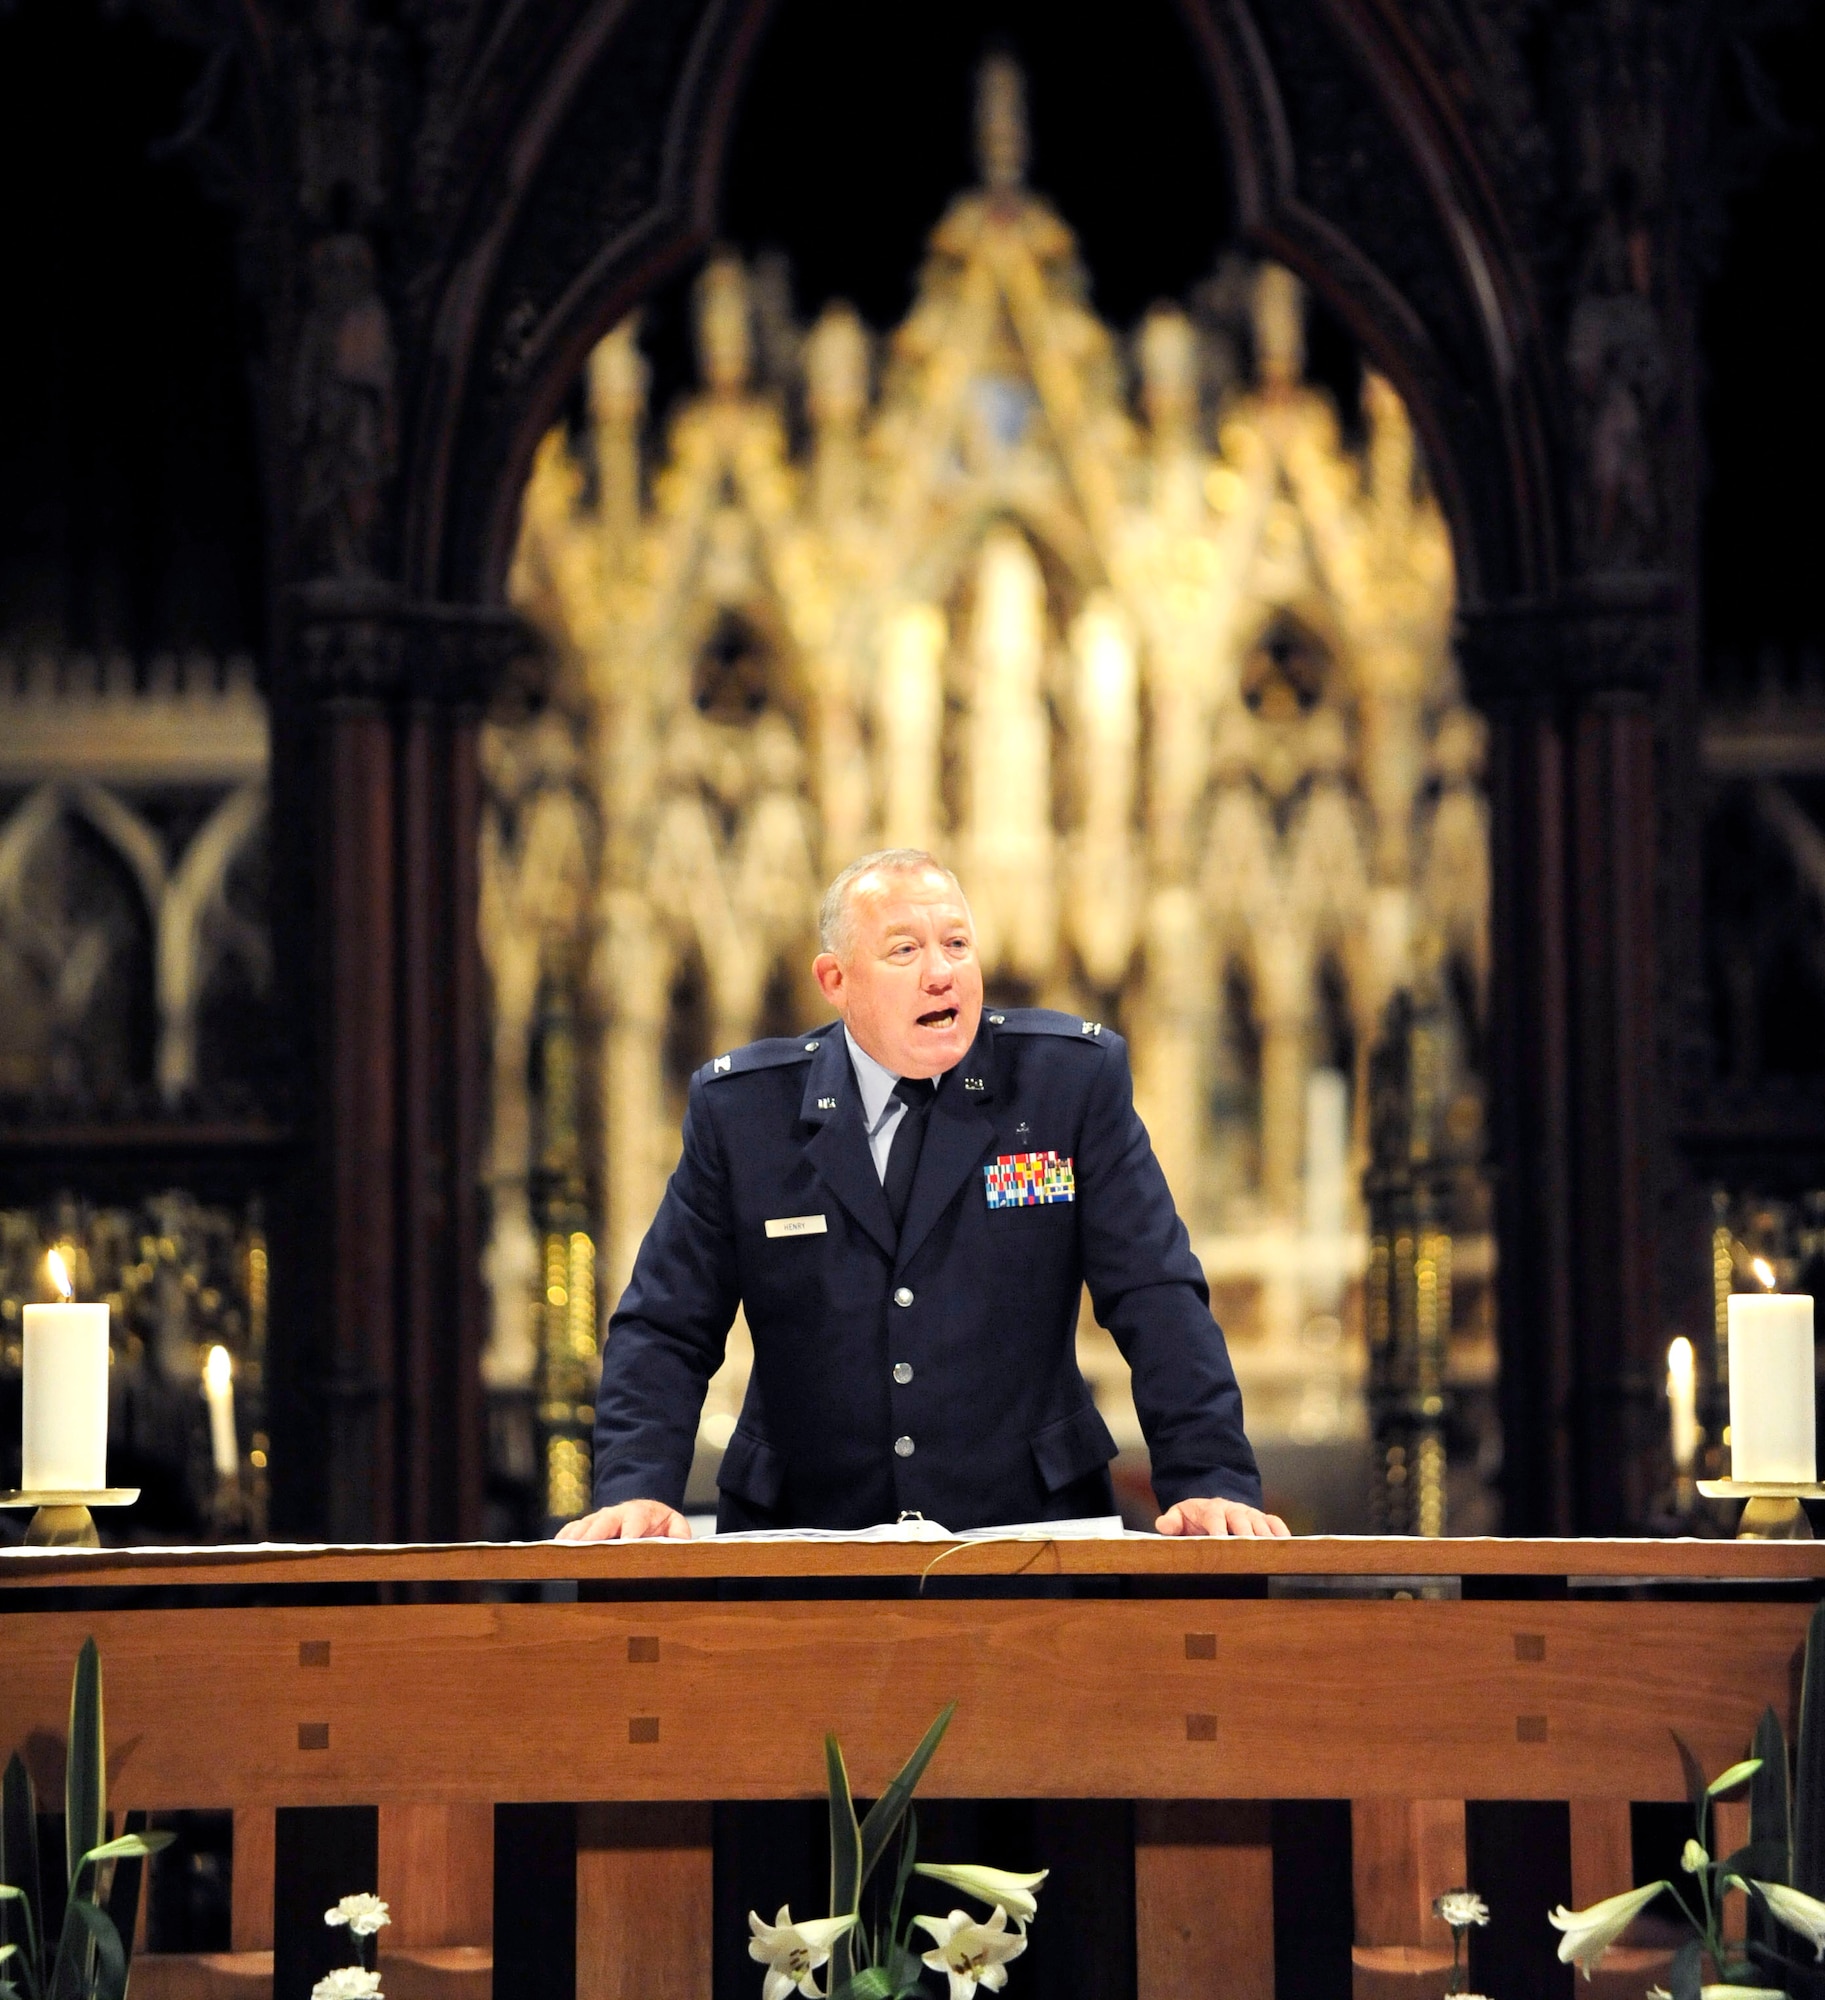 RAF MILDENHALL, England – Chaplain (Col.) Gerald Scott Henry, U.S. Air Force in Europe command chaplain, guest speaker at the event, addresses attendees at the 25th annual Thanksgiving service in Ely Cathedral Nov. 23, 2011. The service of thanks is conducted every year for American service members, their families and other employees of RAF Mildenhall and RAF Lakenheath. (U.S. Air Force photo/Senior Airman Ethan Morgan)